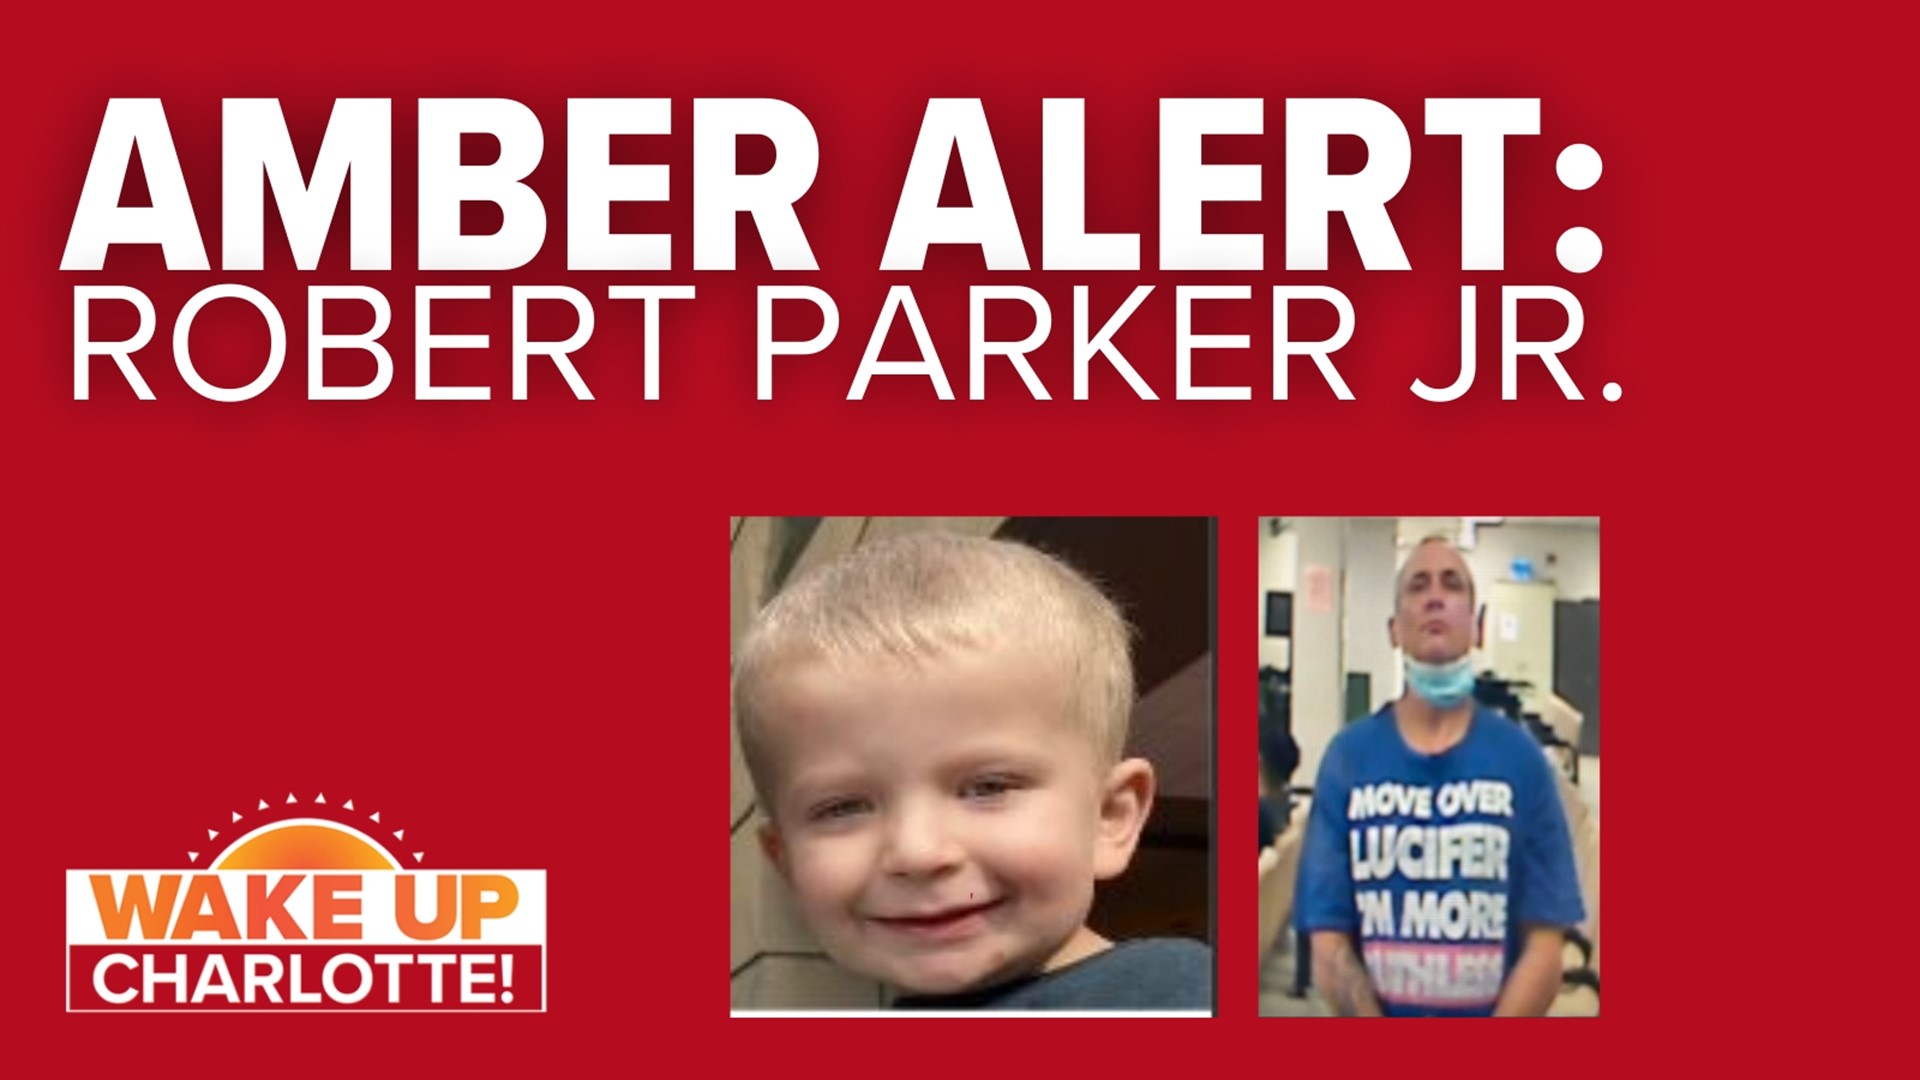 The Fayetteville Police Department is searching for a missing child, Robert Parker Jr.